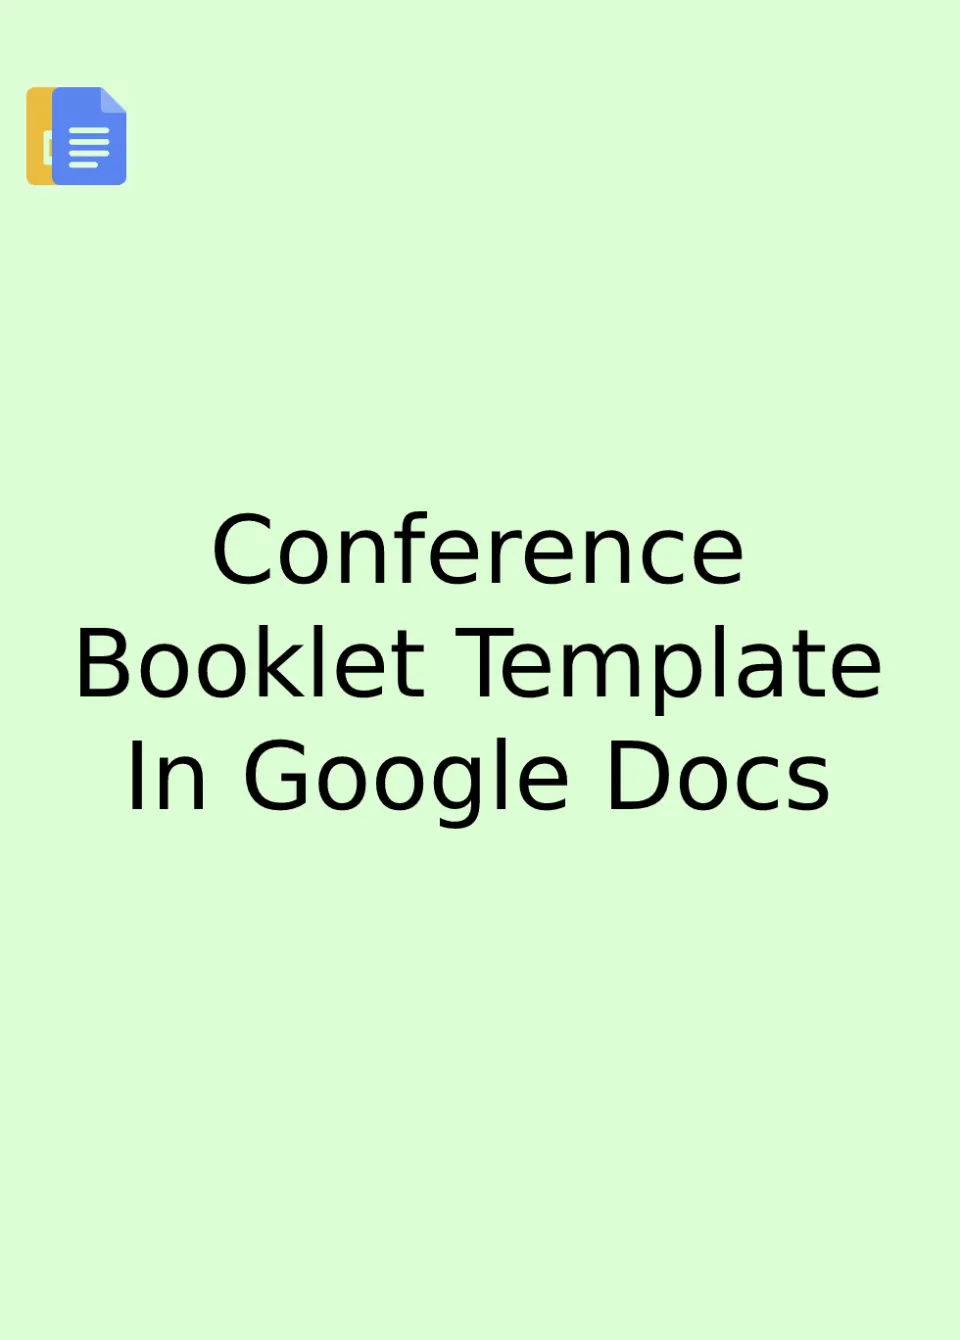 Conference Booklet Template Google Docs